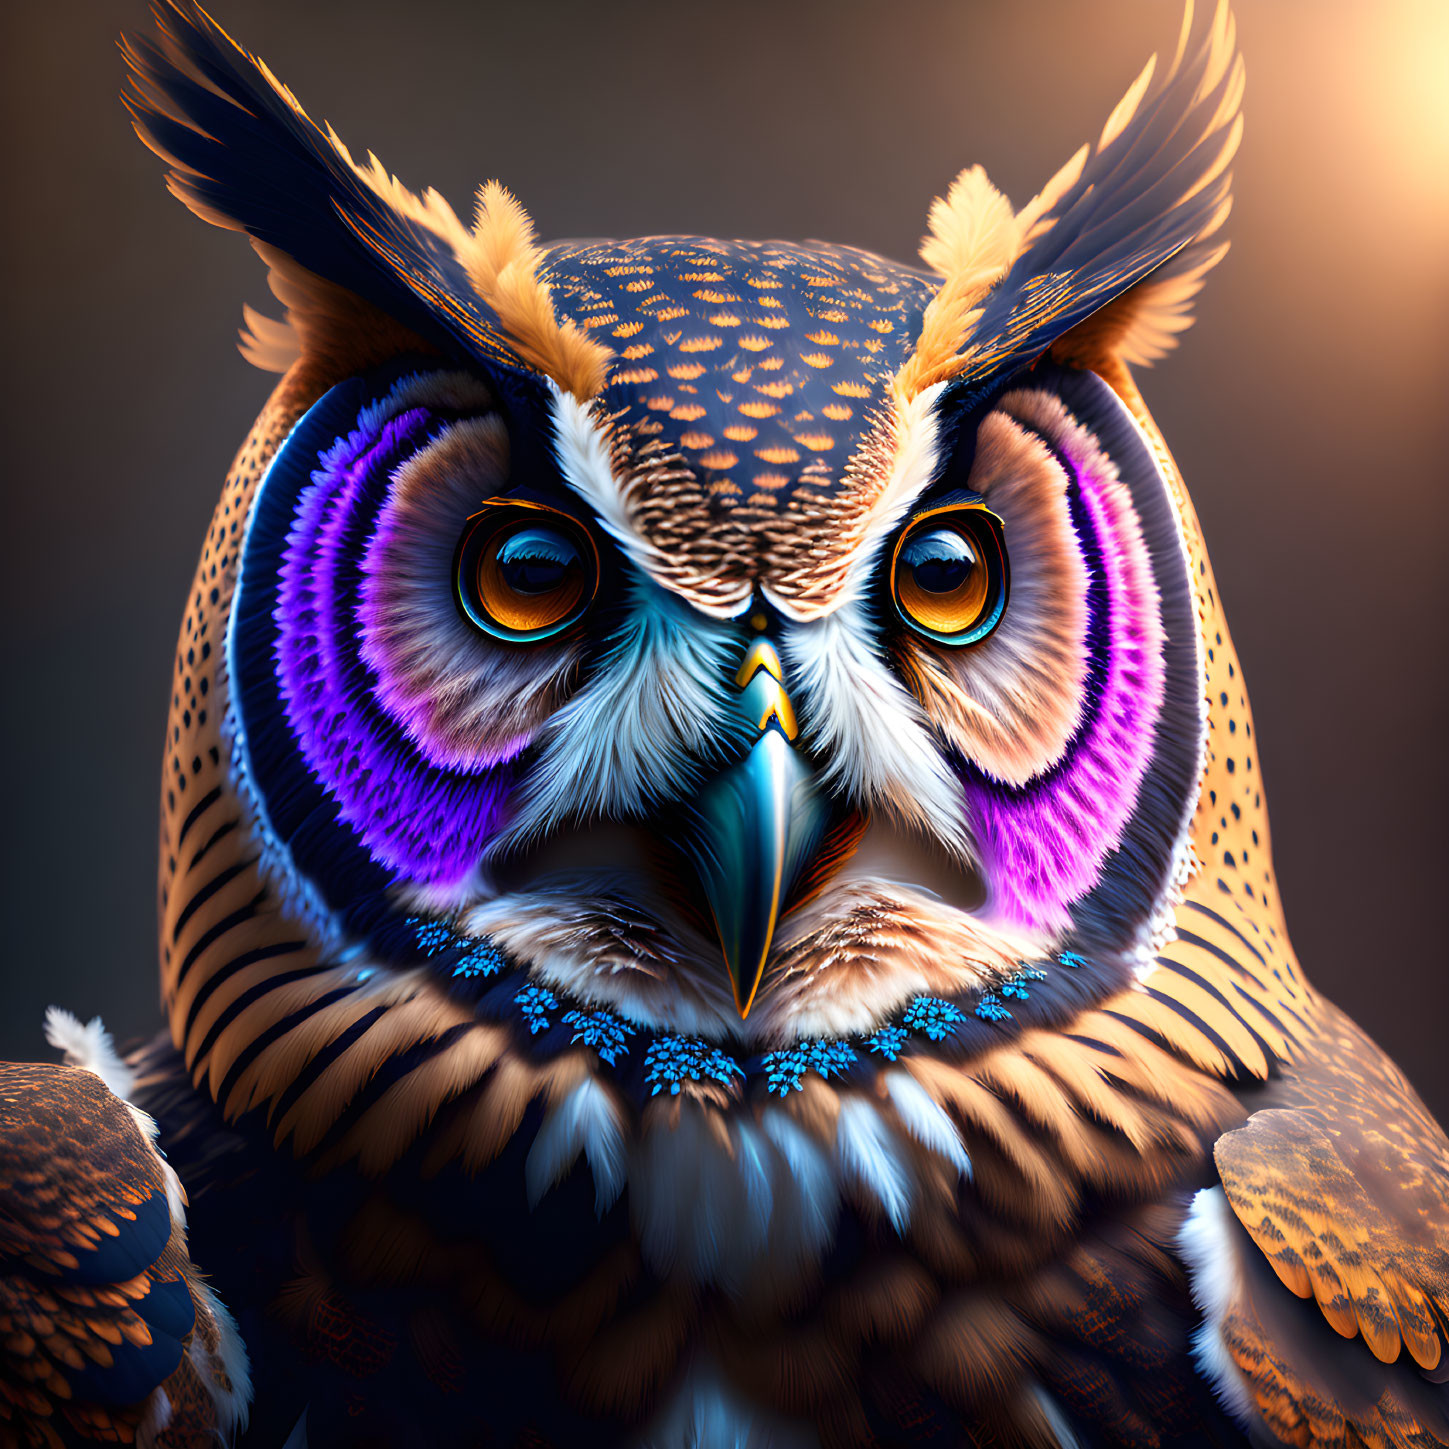 Vibrant owl illustration with intricate patterns in blue, orange, and purple